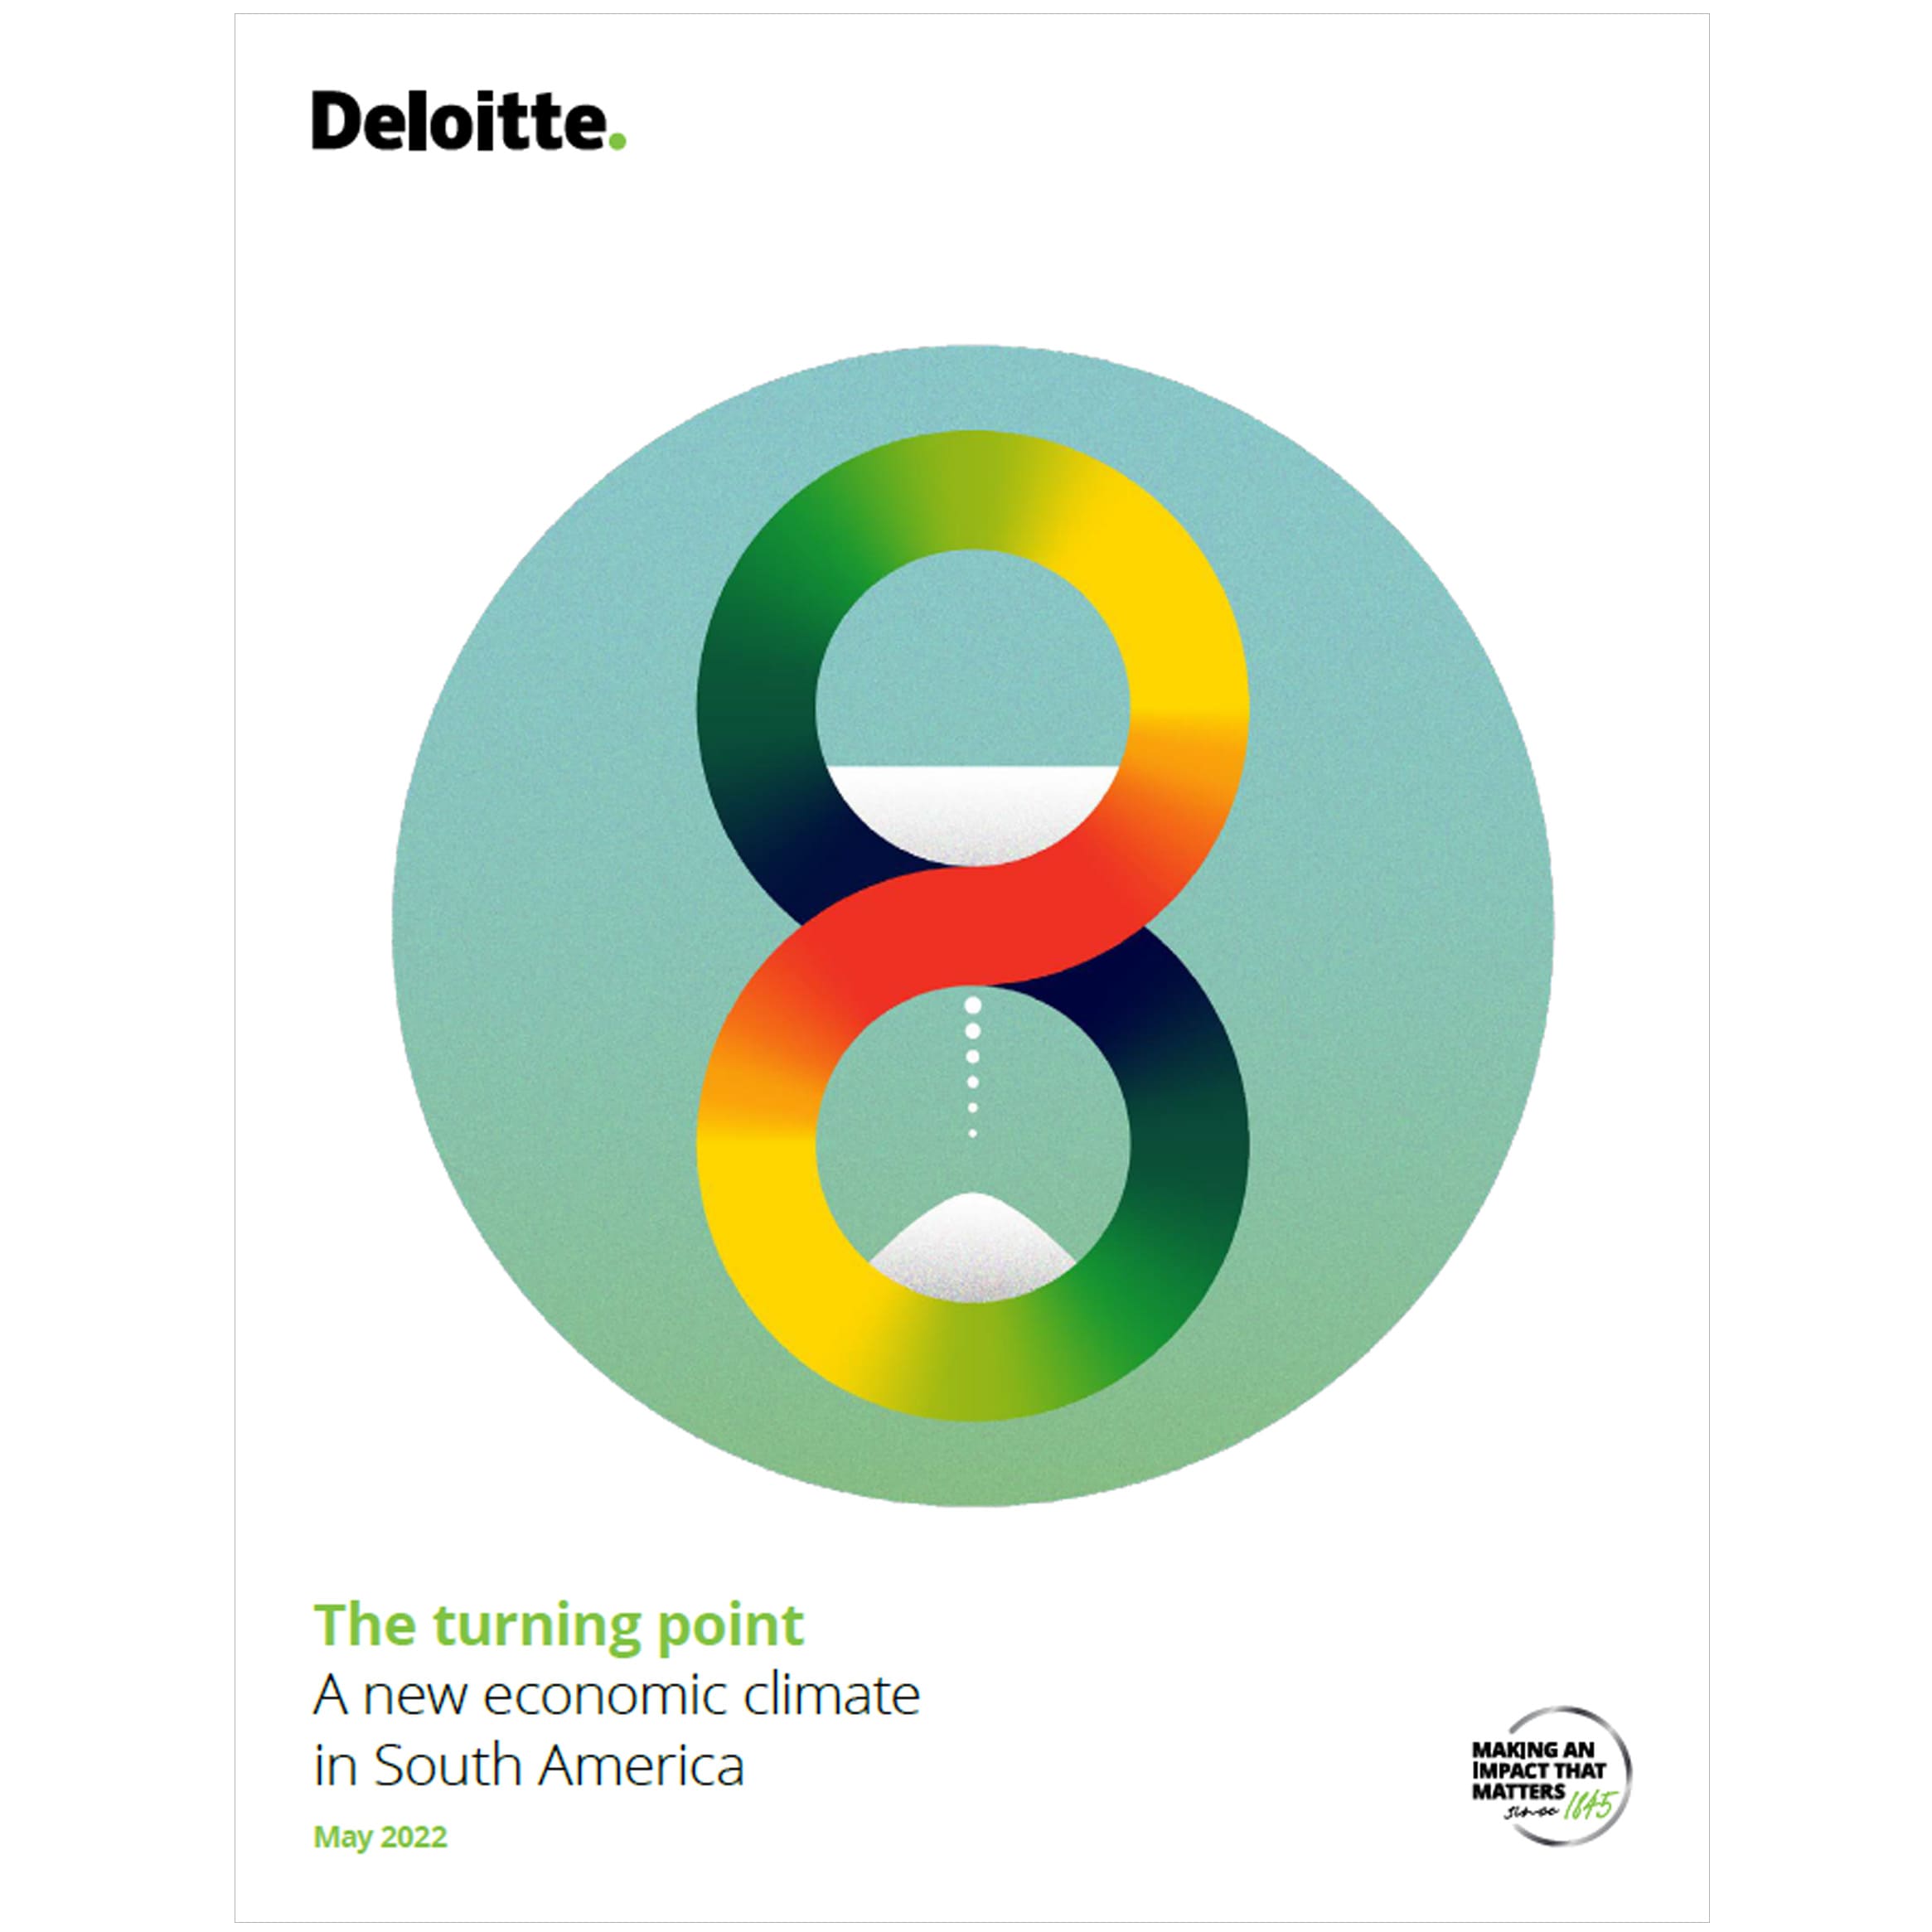 The turning point | A new economic climate in South America